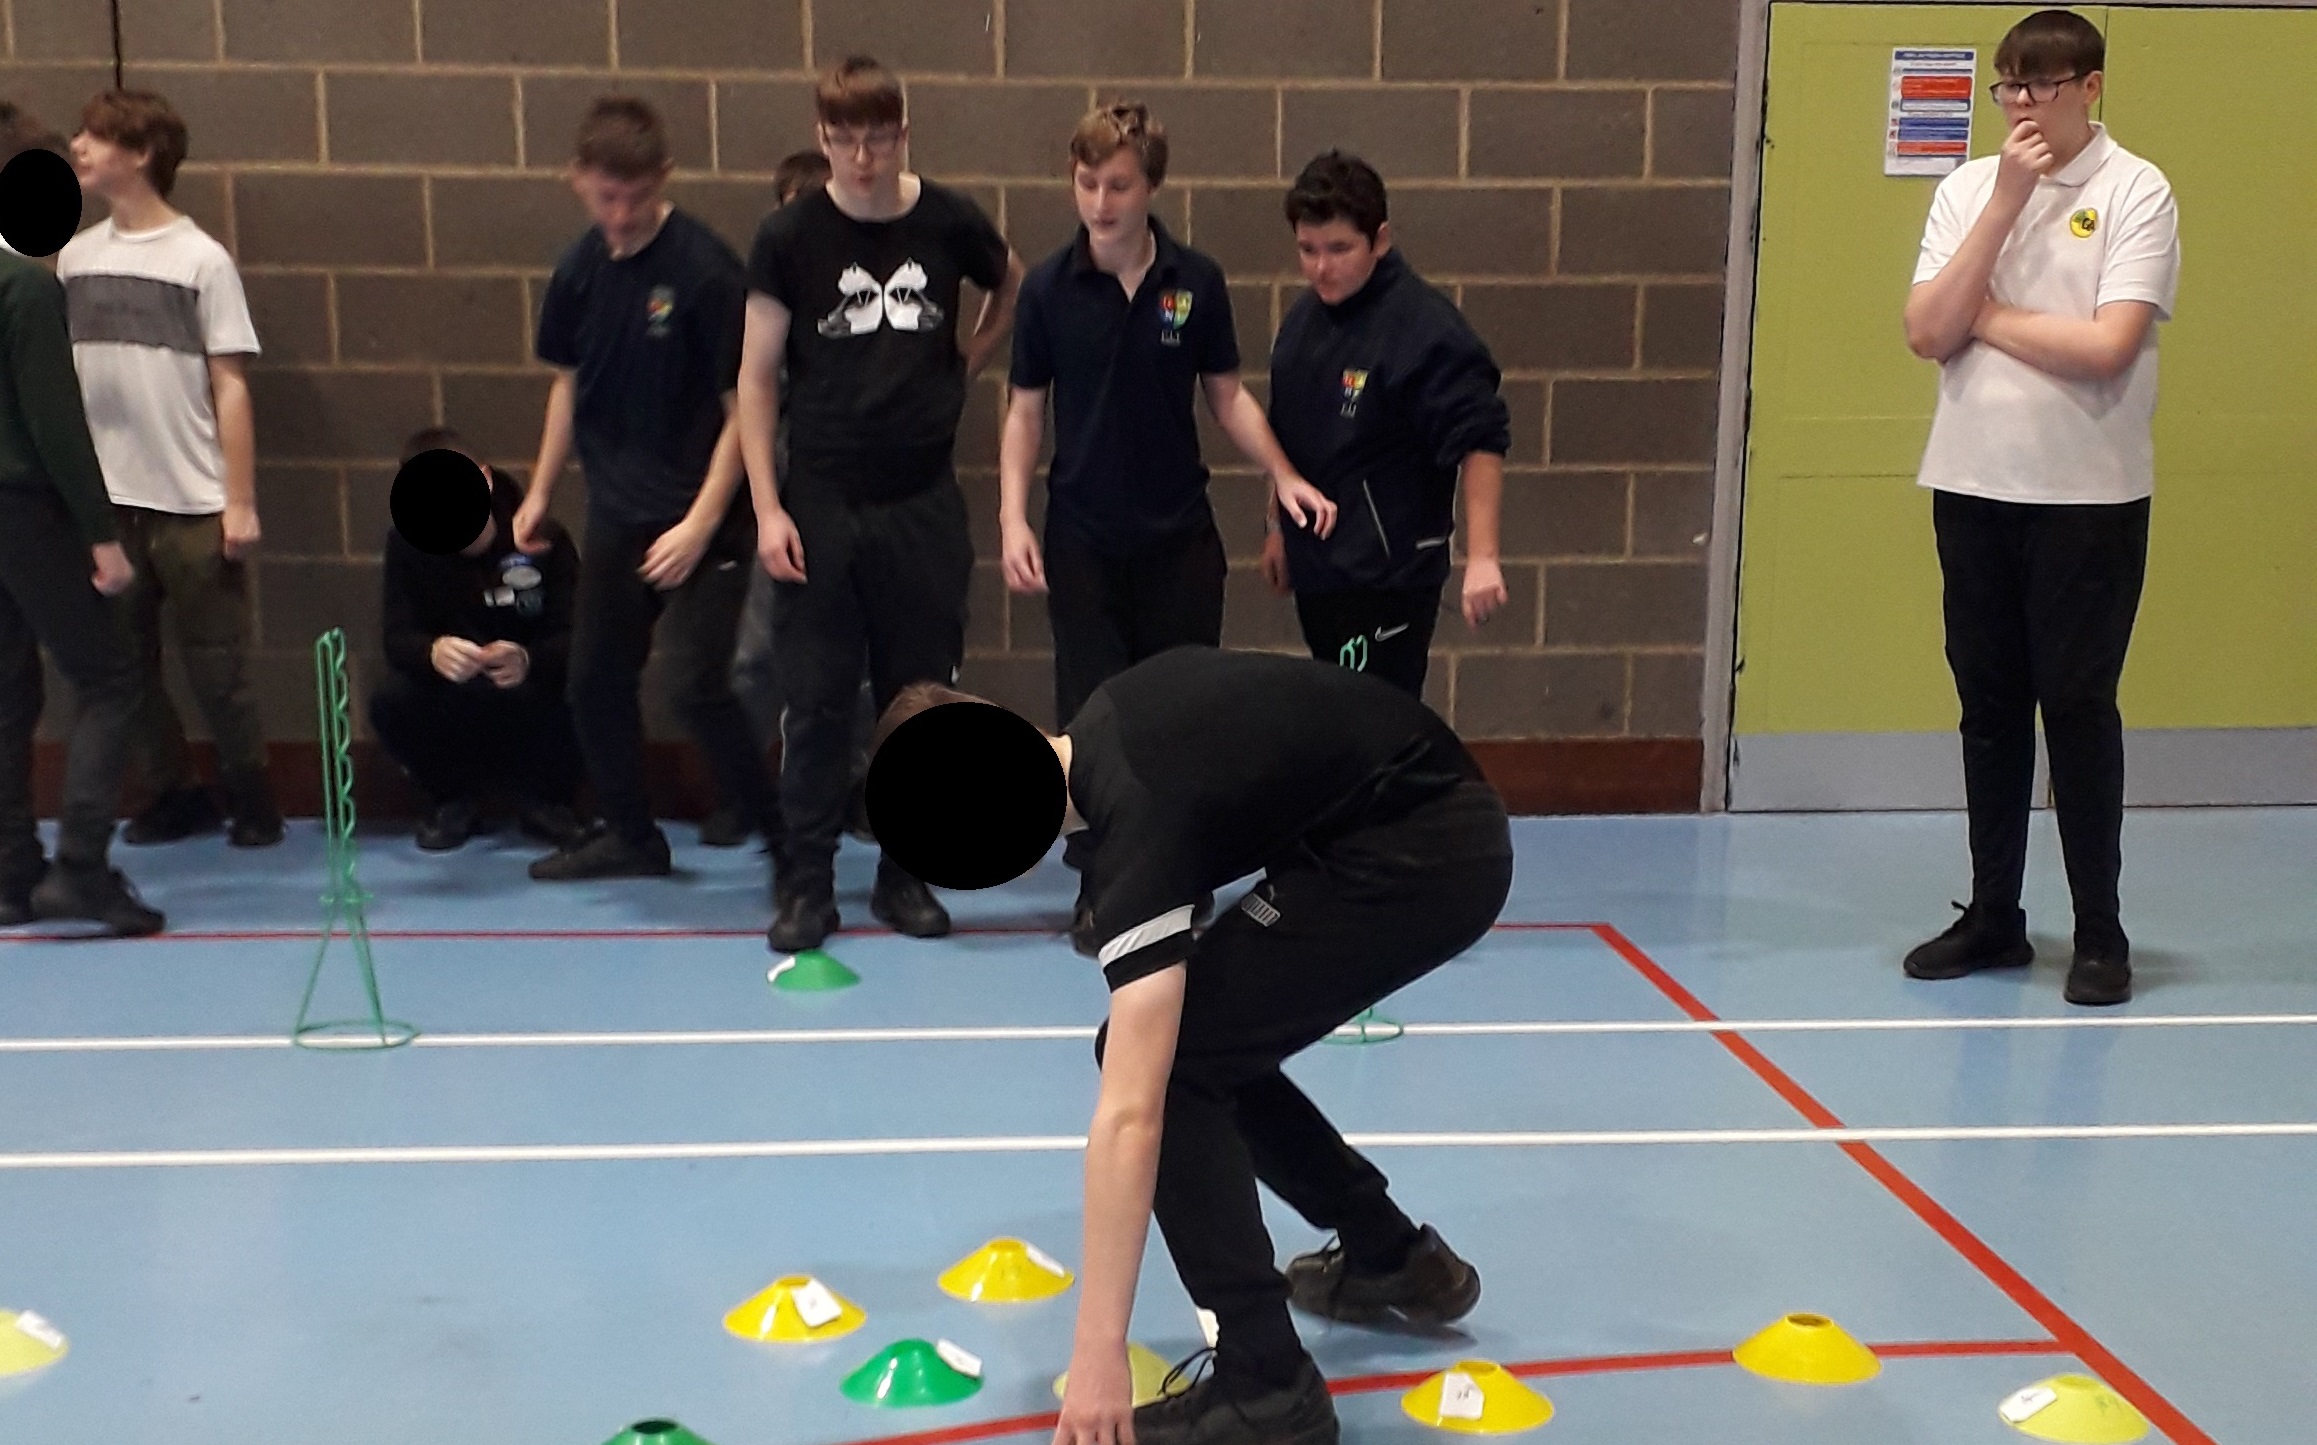 pupils playing a game